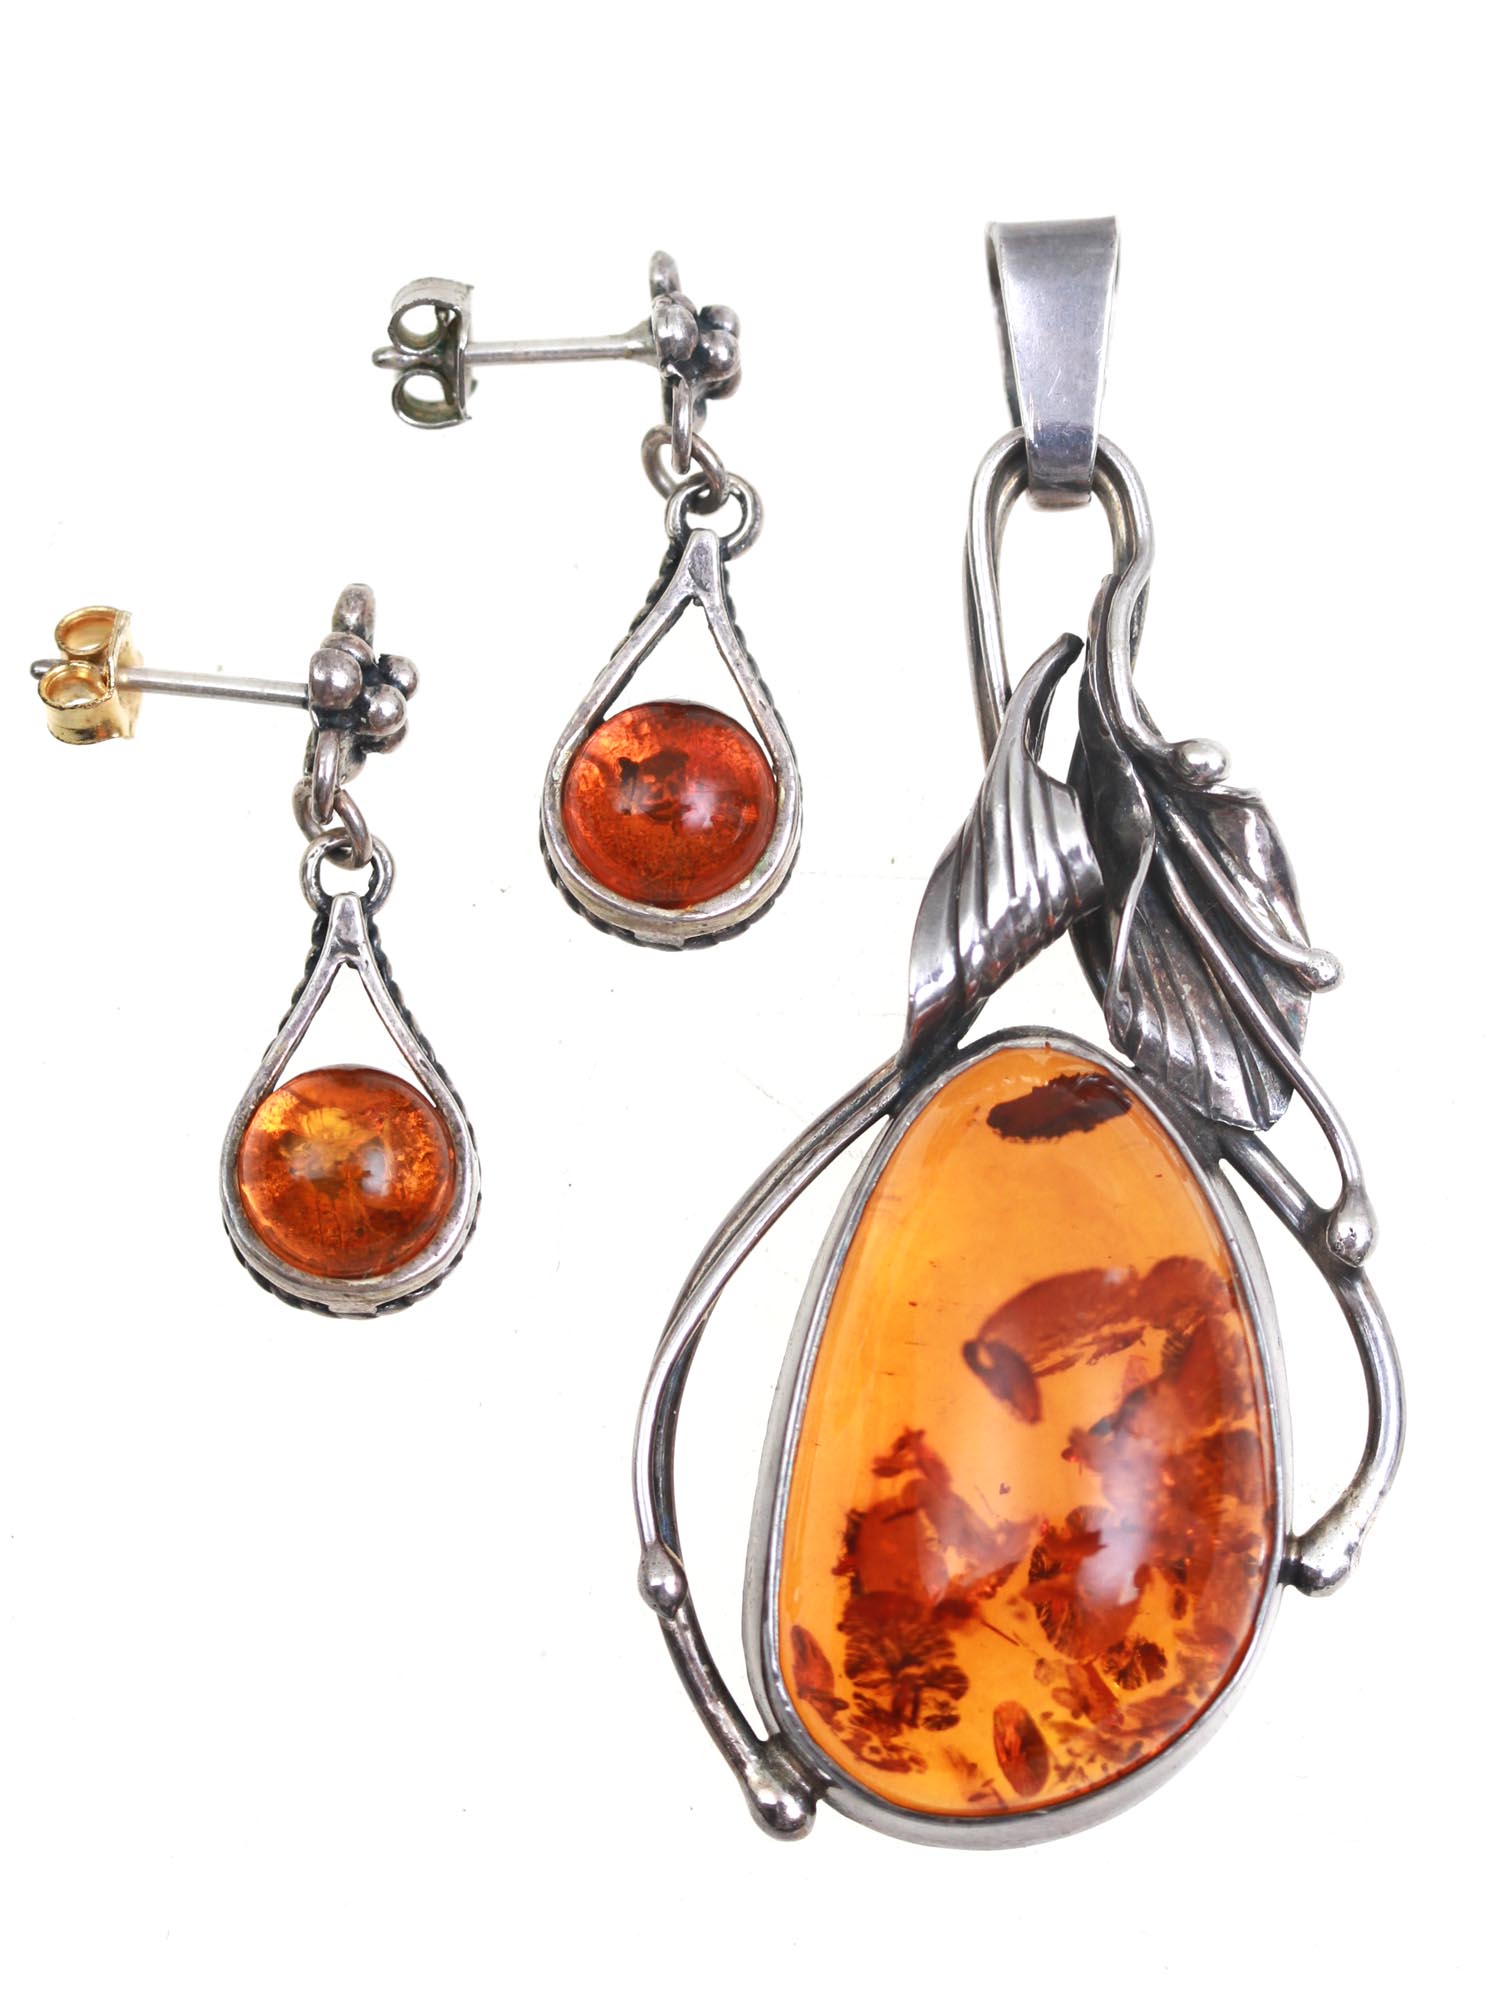 A JEWELRY SET OF AMBER & SILVER RINGS AND PENDANT PIC-2